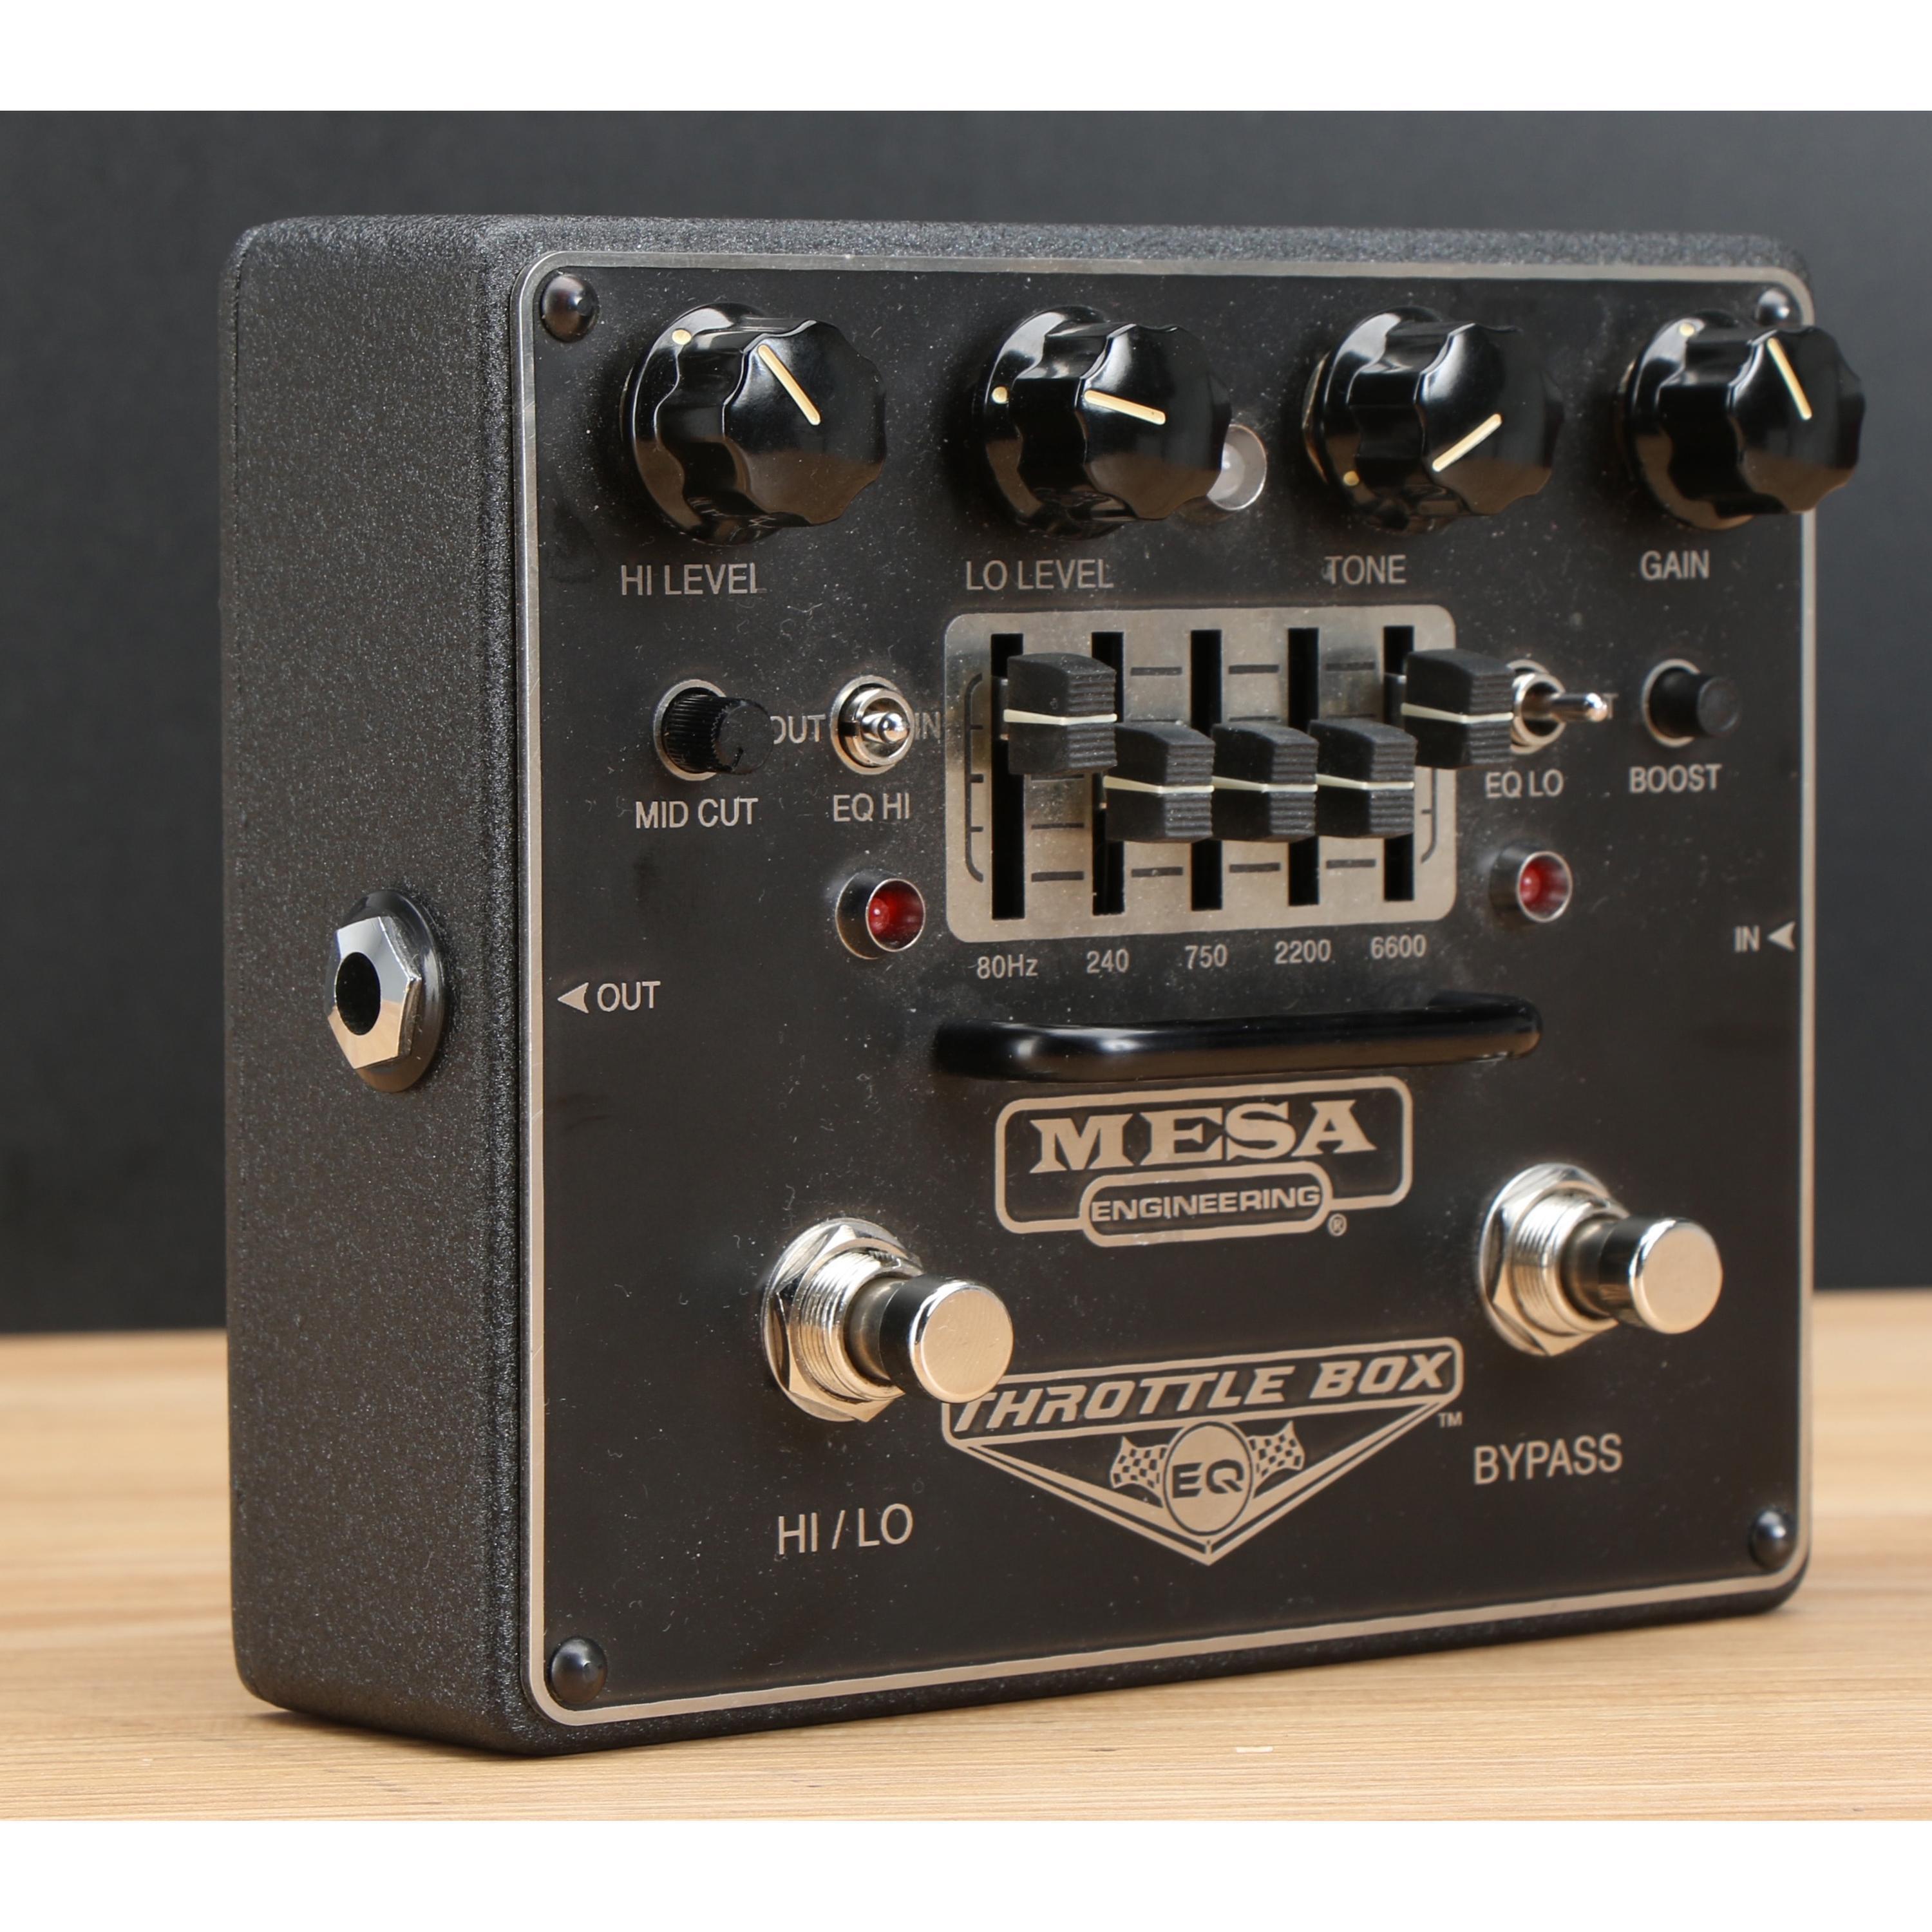 Used Mesa/Boogie Throttle Box EQ Dist - Sweetwater's Gear Exchange